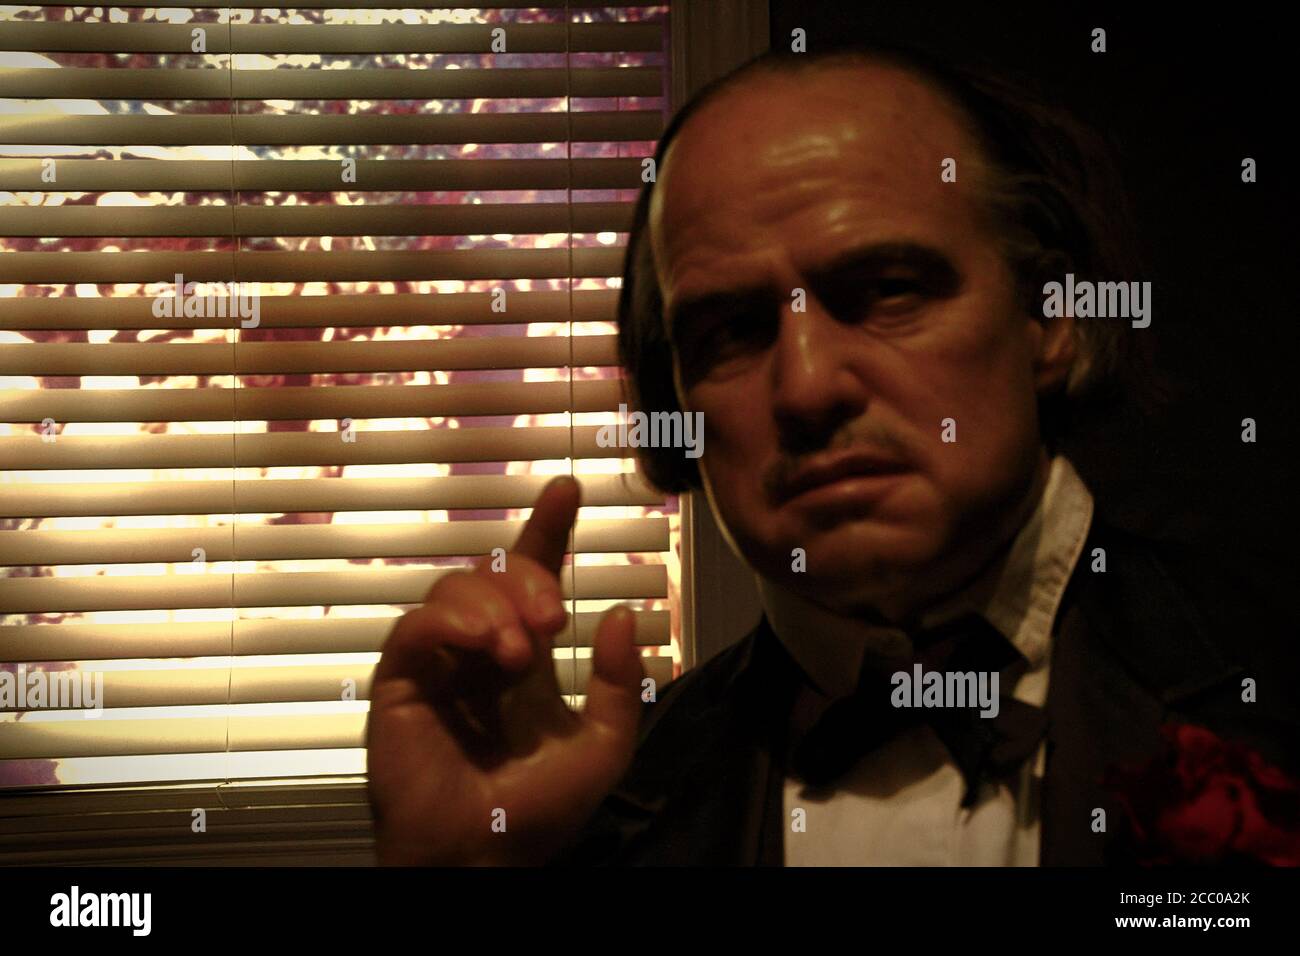 Waxwork of Marlon Brando as Godfather Don Vito Corleone,Madame Tussauds Hollywood.an enemy, says,  “It’s not personal, it’s just business.” Stock Photo